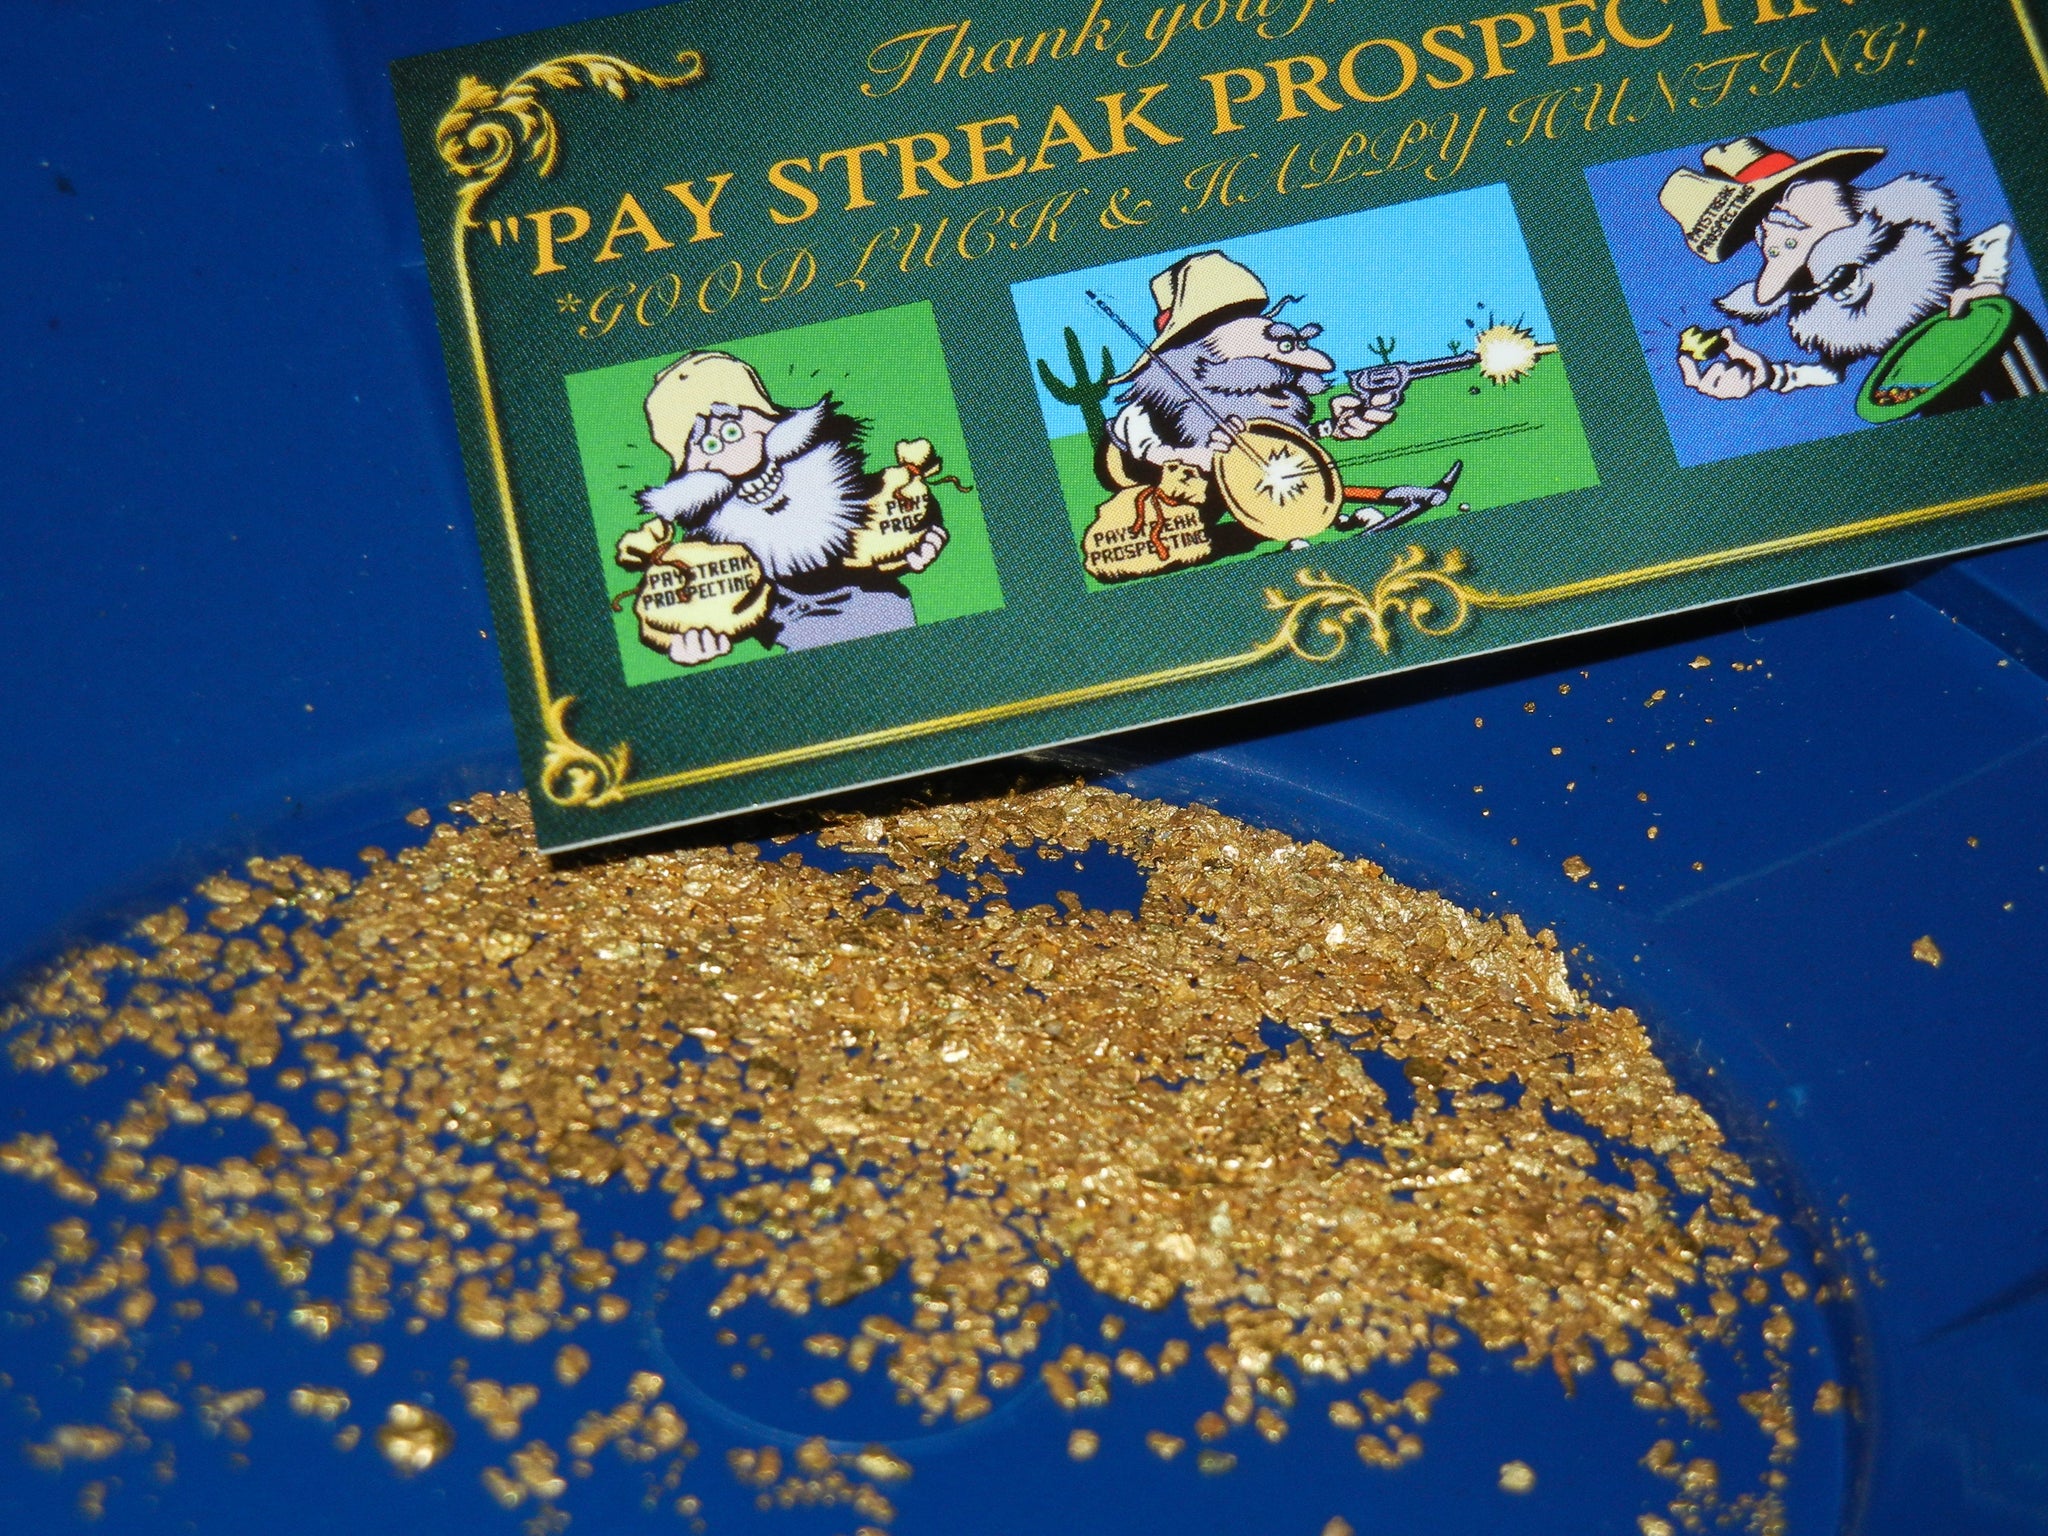 BOGO DEAL! 4 Lbs 'NUGGET ELITE' Gold Paydirt Unsearched – Pay Streak  Prospecting